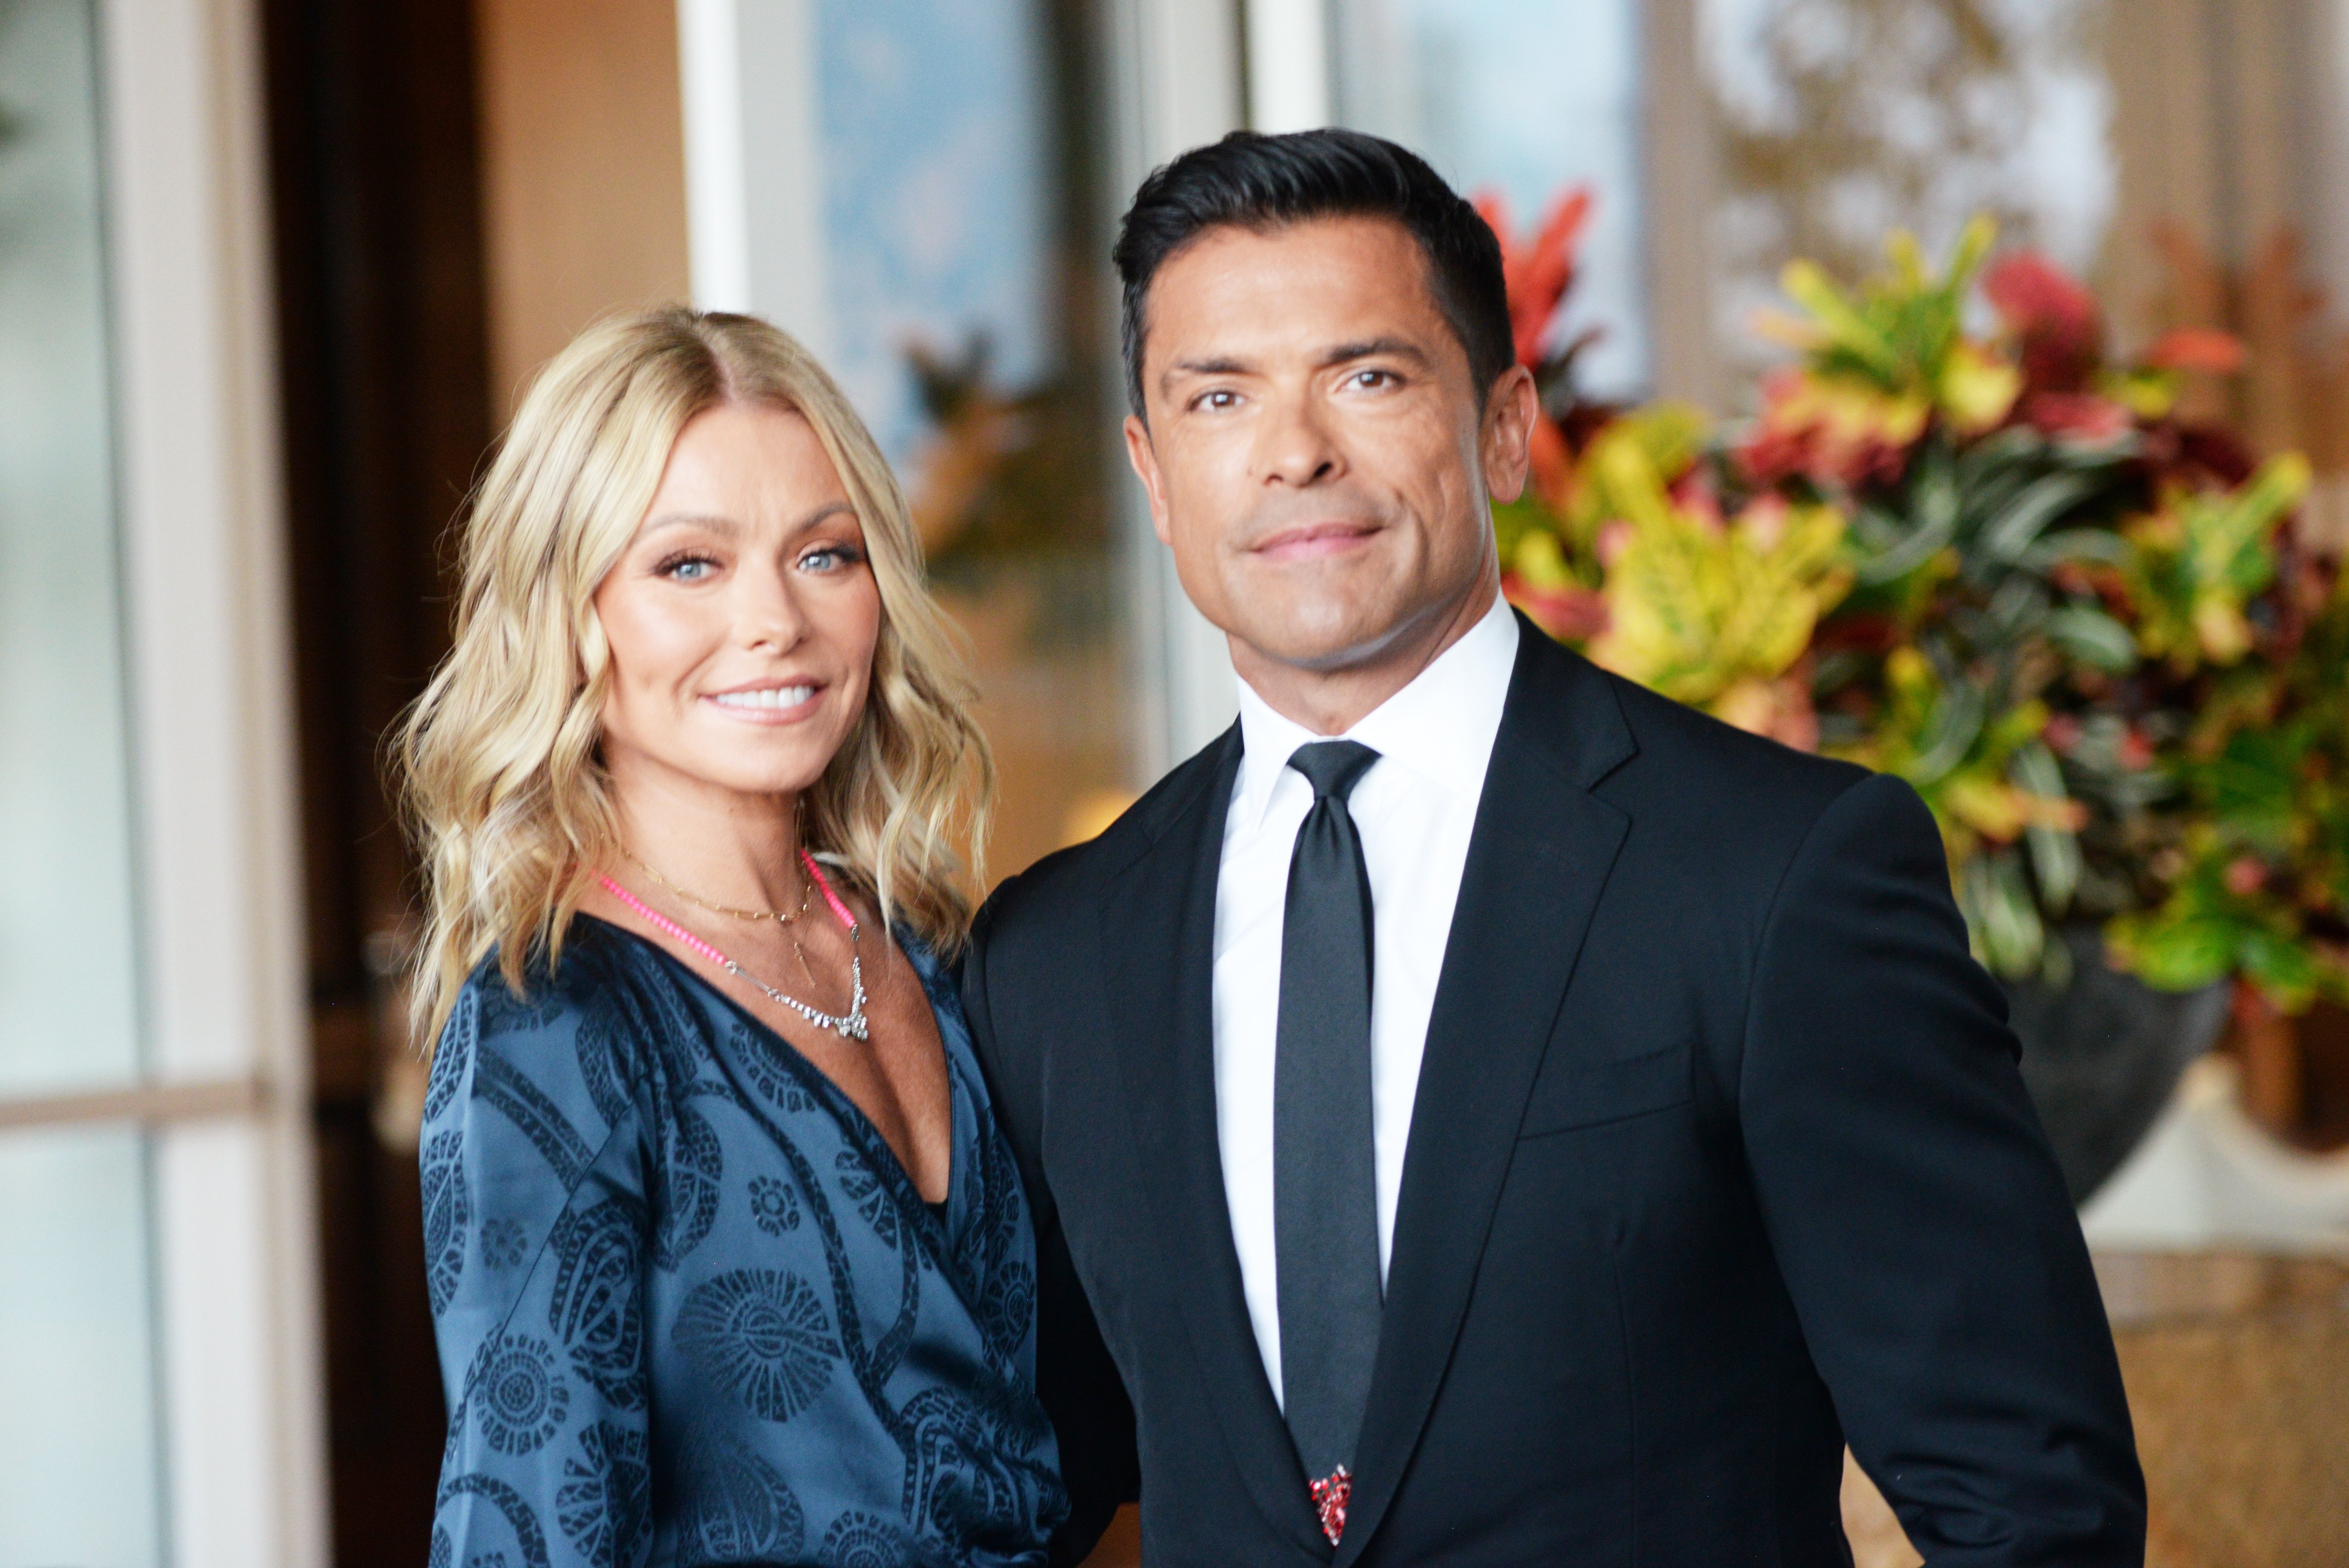 Kelly Ripa and Mark Consuelos arrive at the Los Angeles LGBT Center's 49th Anniversary Gala Vanguard Awards on September 22, 2018, in Beverly Hills, California. | Source: Getty Images.